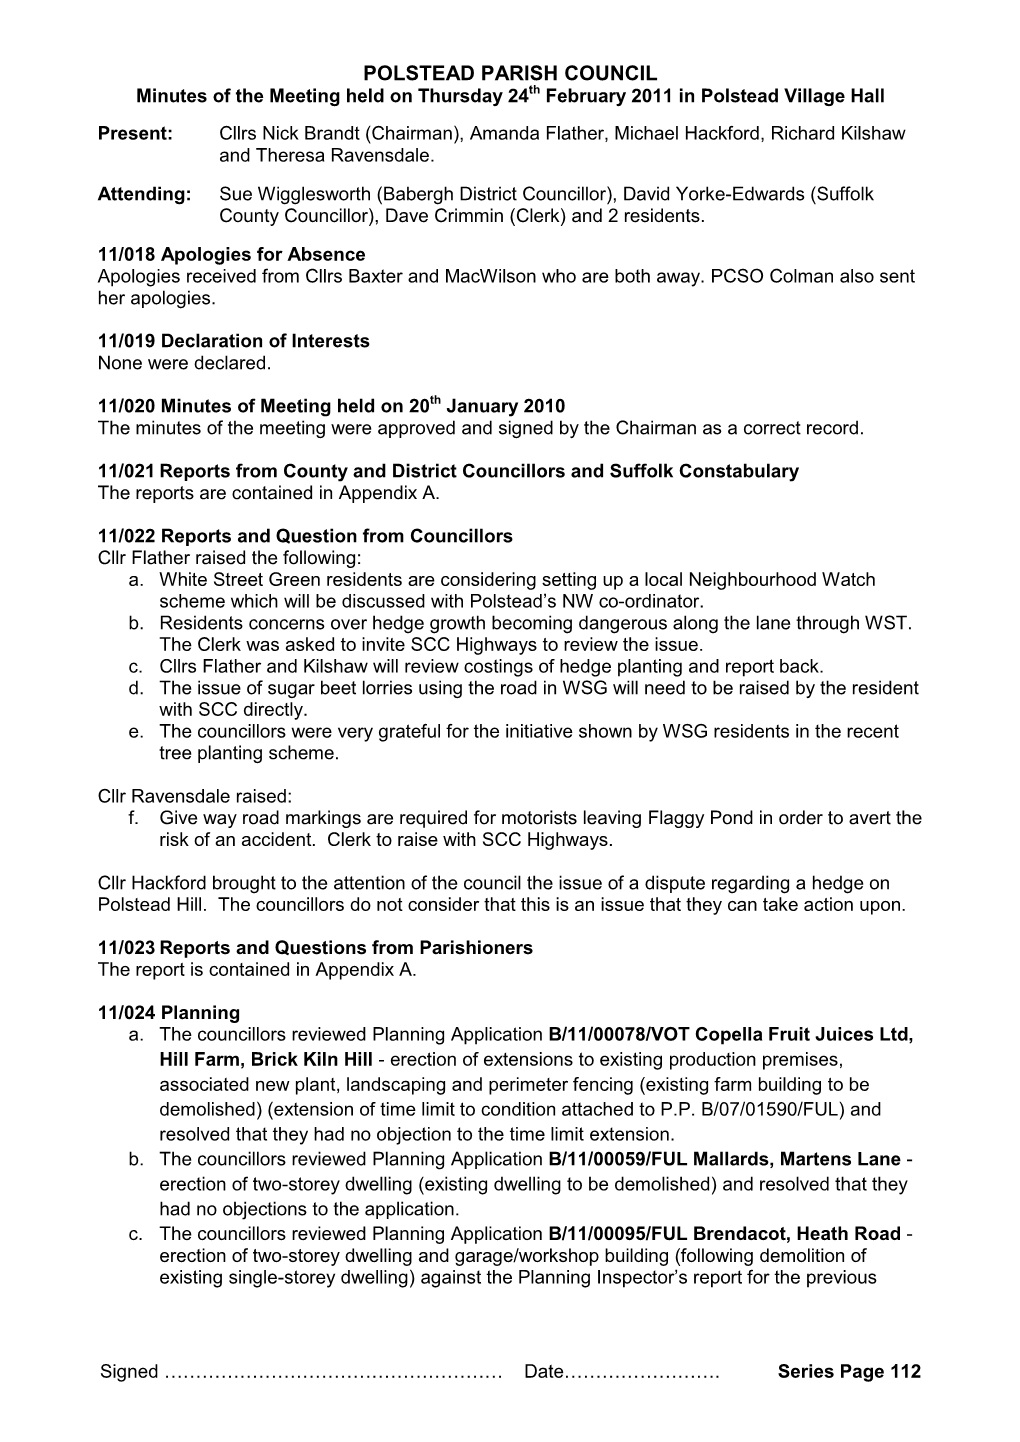 POLSTEAD PARISH COUNCIL Minutes of the Meeting Held on Thursday 24Th February 2011 in Polstead Village Hall